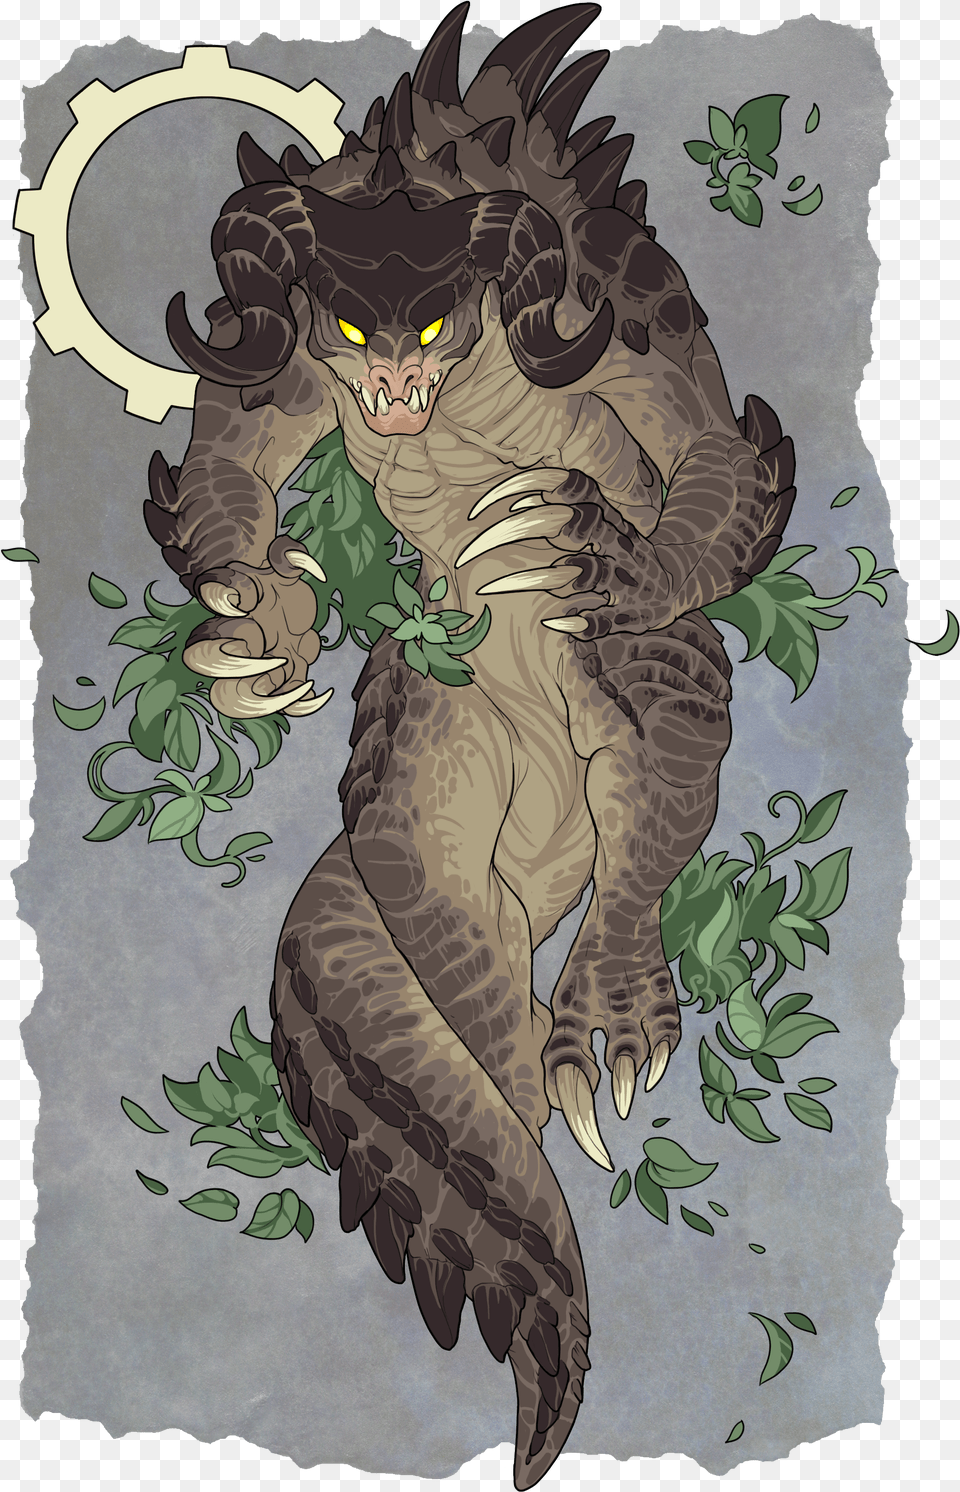 Deathclaw Fallout 4 Deathclaw Fanart Png Image